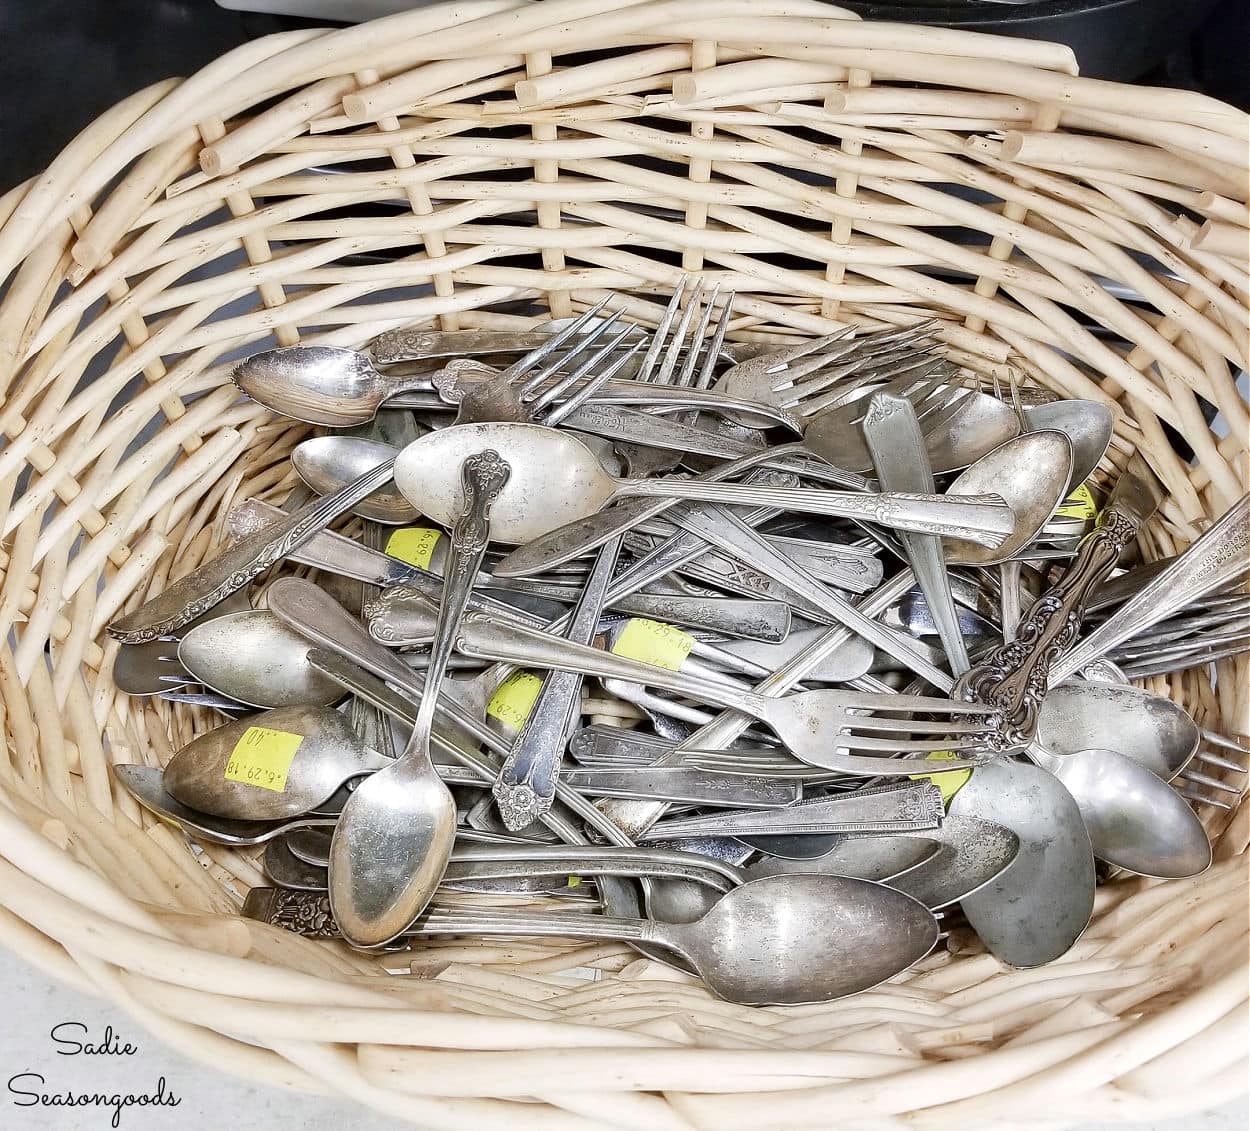 Vintage silverware for jewelry projects